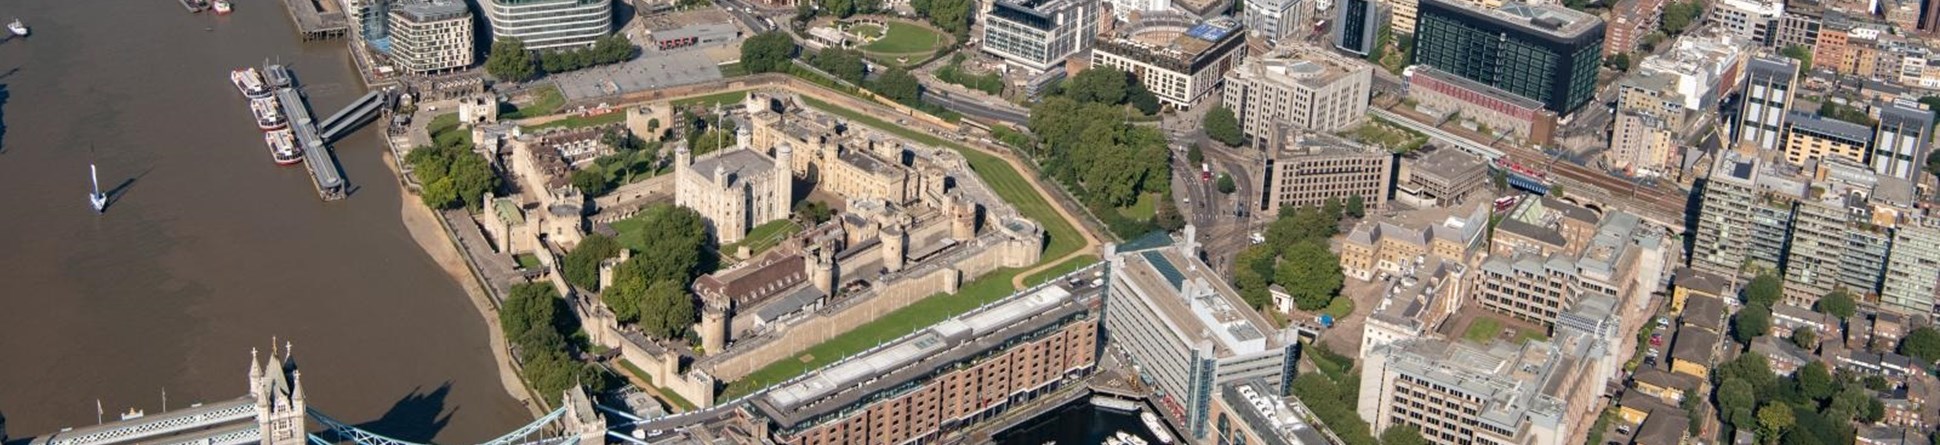 Aerial view of buildings surrounding the Tower of London